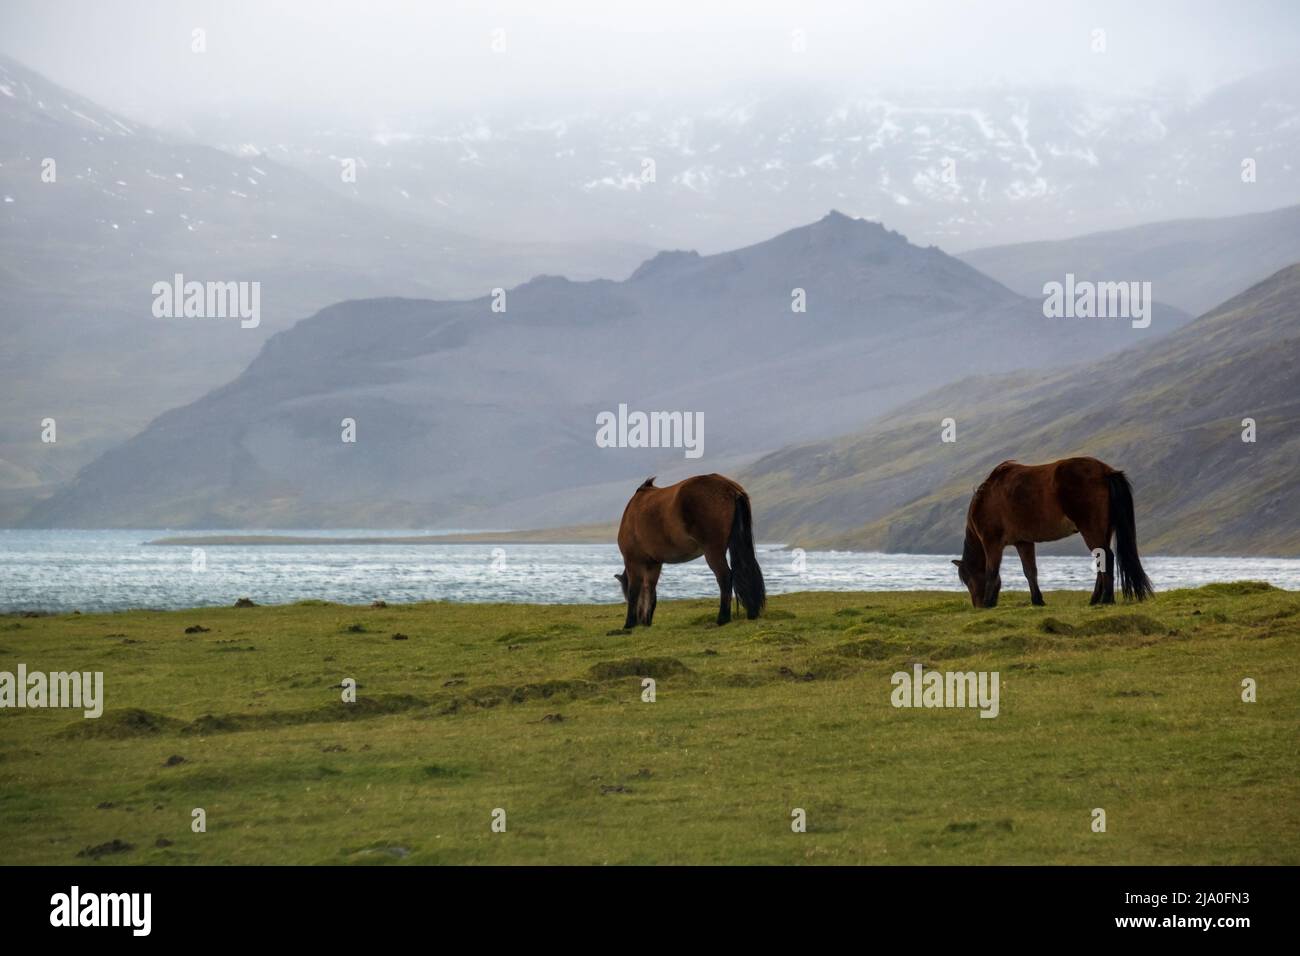 Pair of Icelandic horses graze on West Iceland highlands, Snaefellsnes peninsula. Spectacular volcanic tundra landscape with mountains, craters, lakes Stock Photo